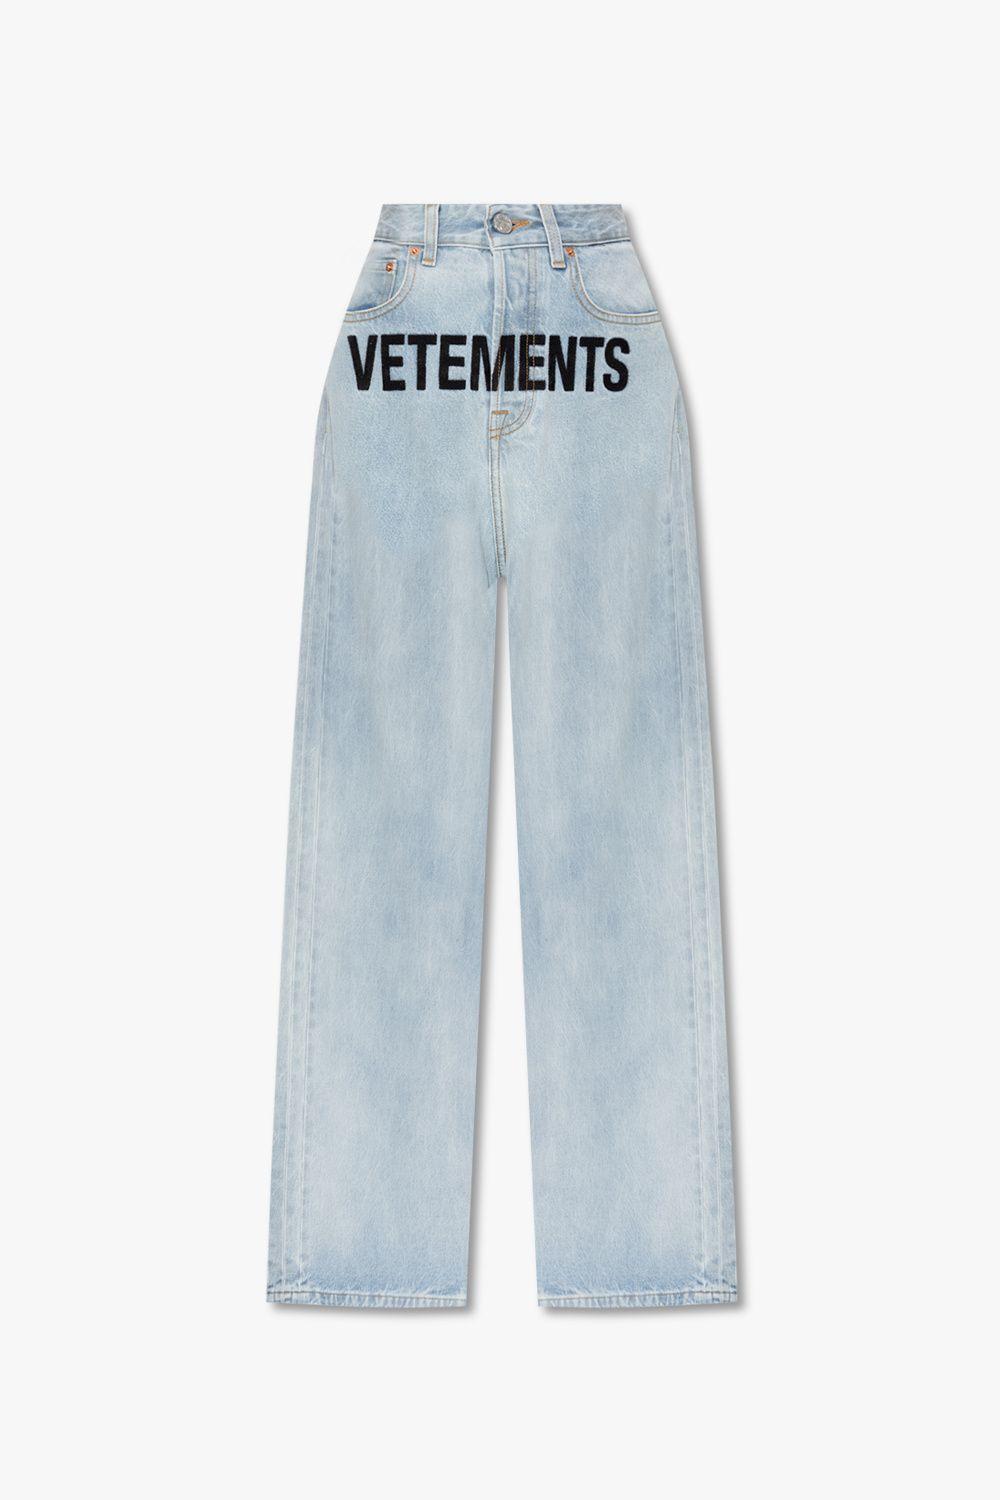 Vetements Jeans With Logo in Blue | Lyst